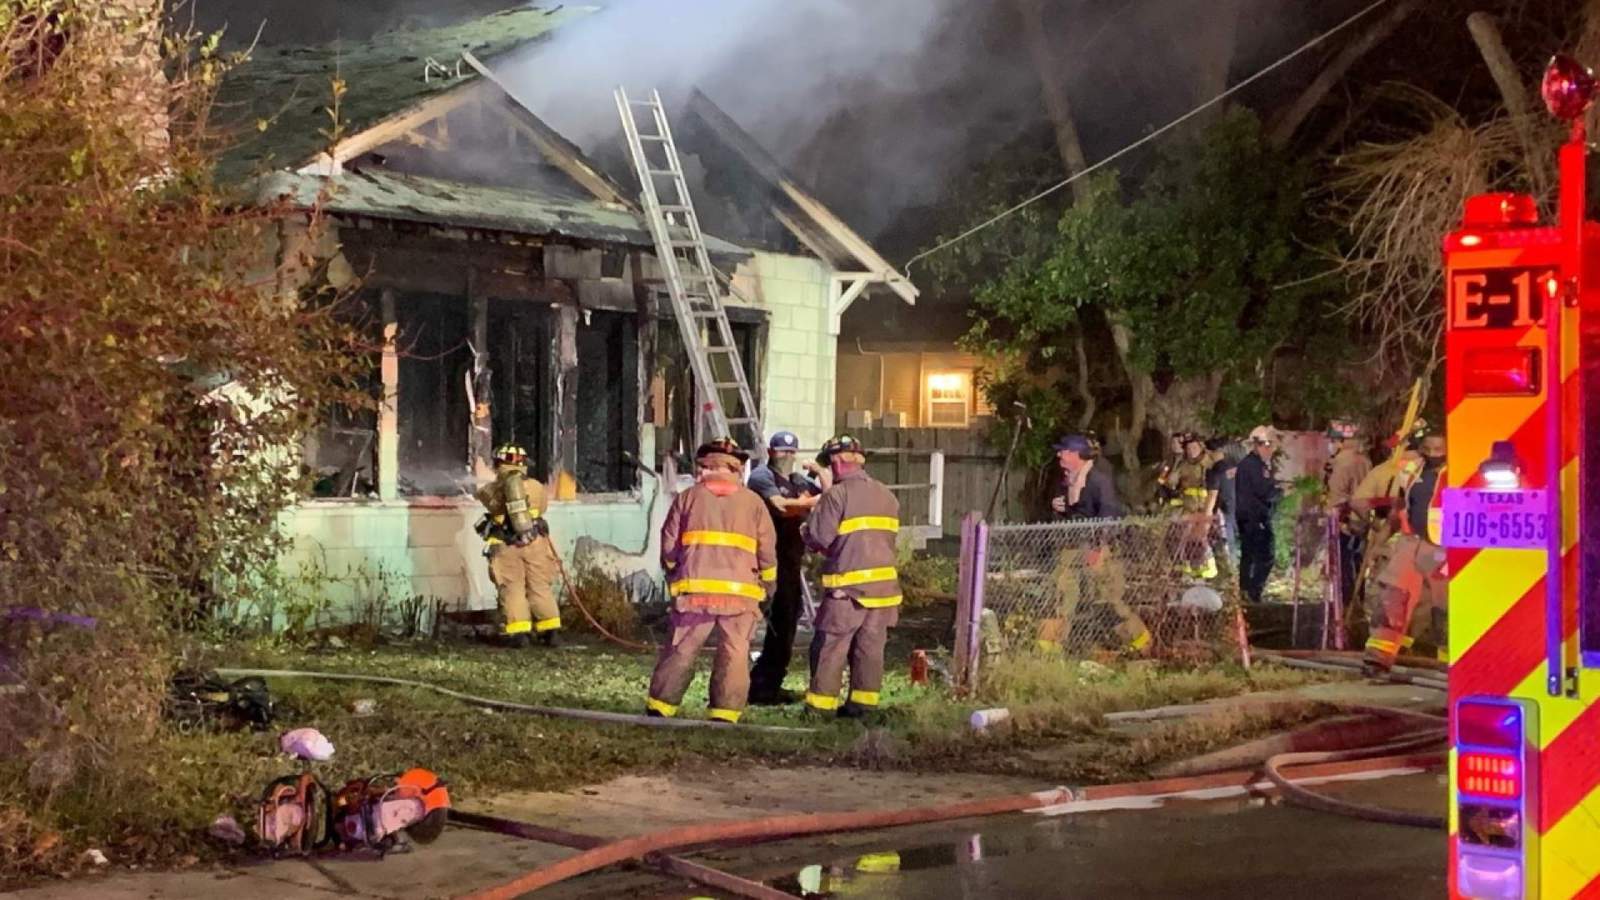 Arson investigators looking for cause of fire in suspected hoarder house